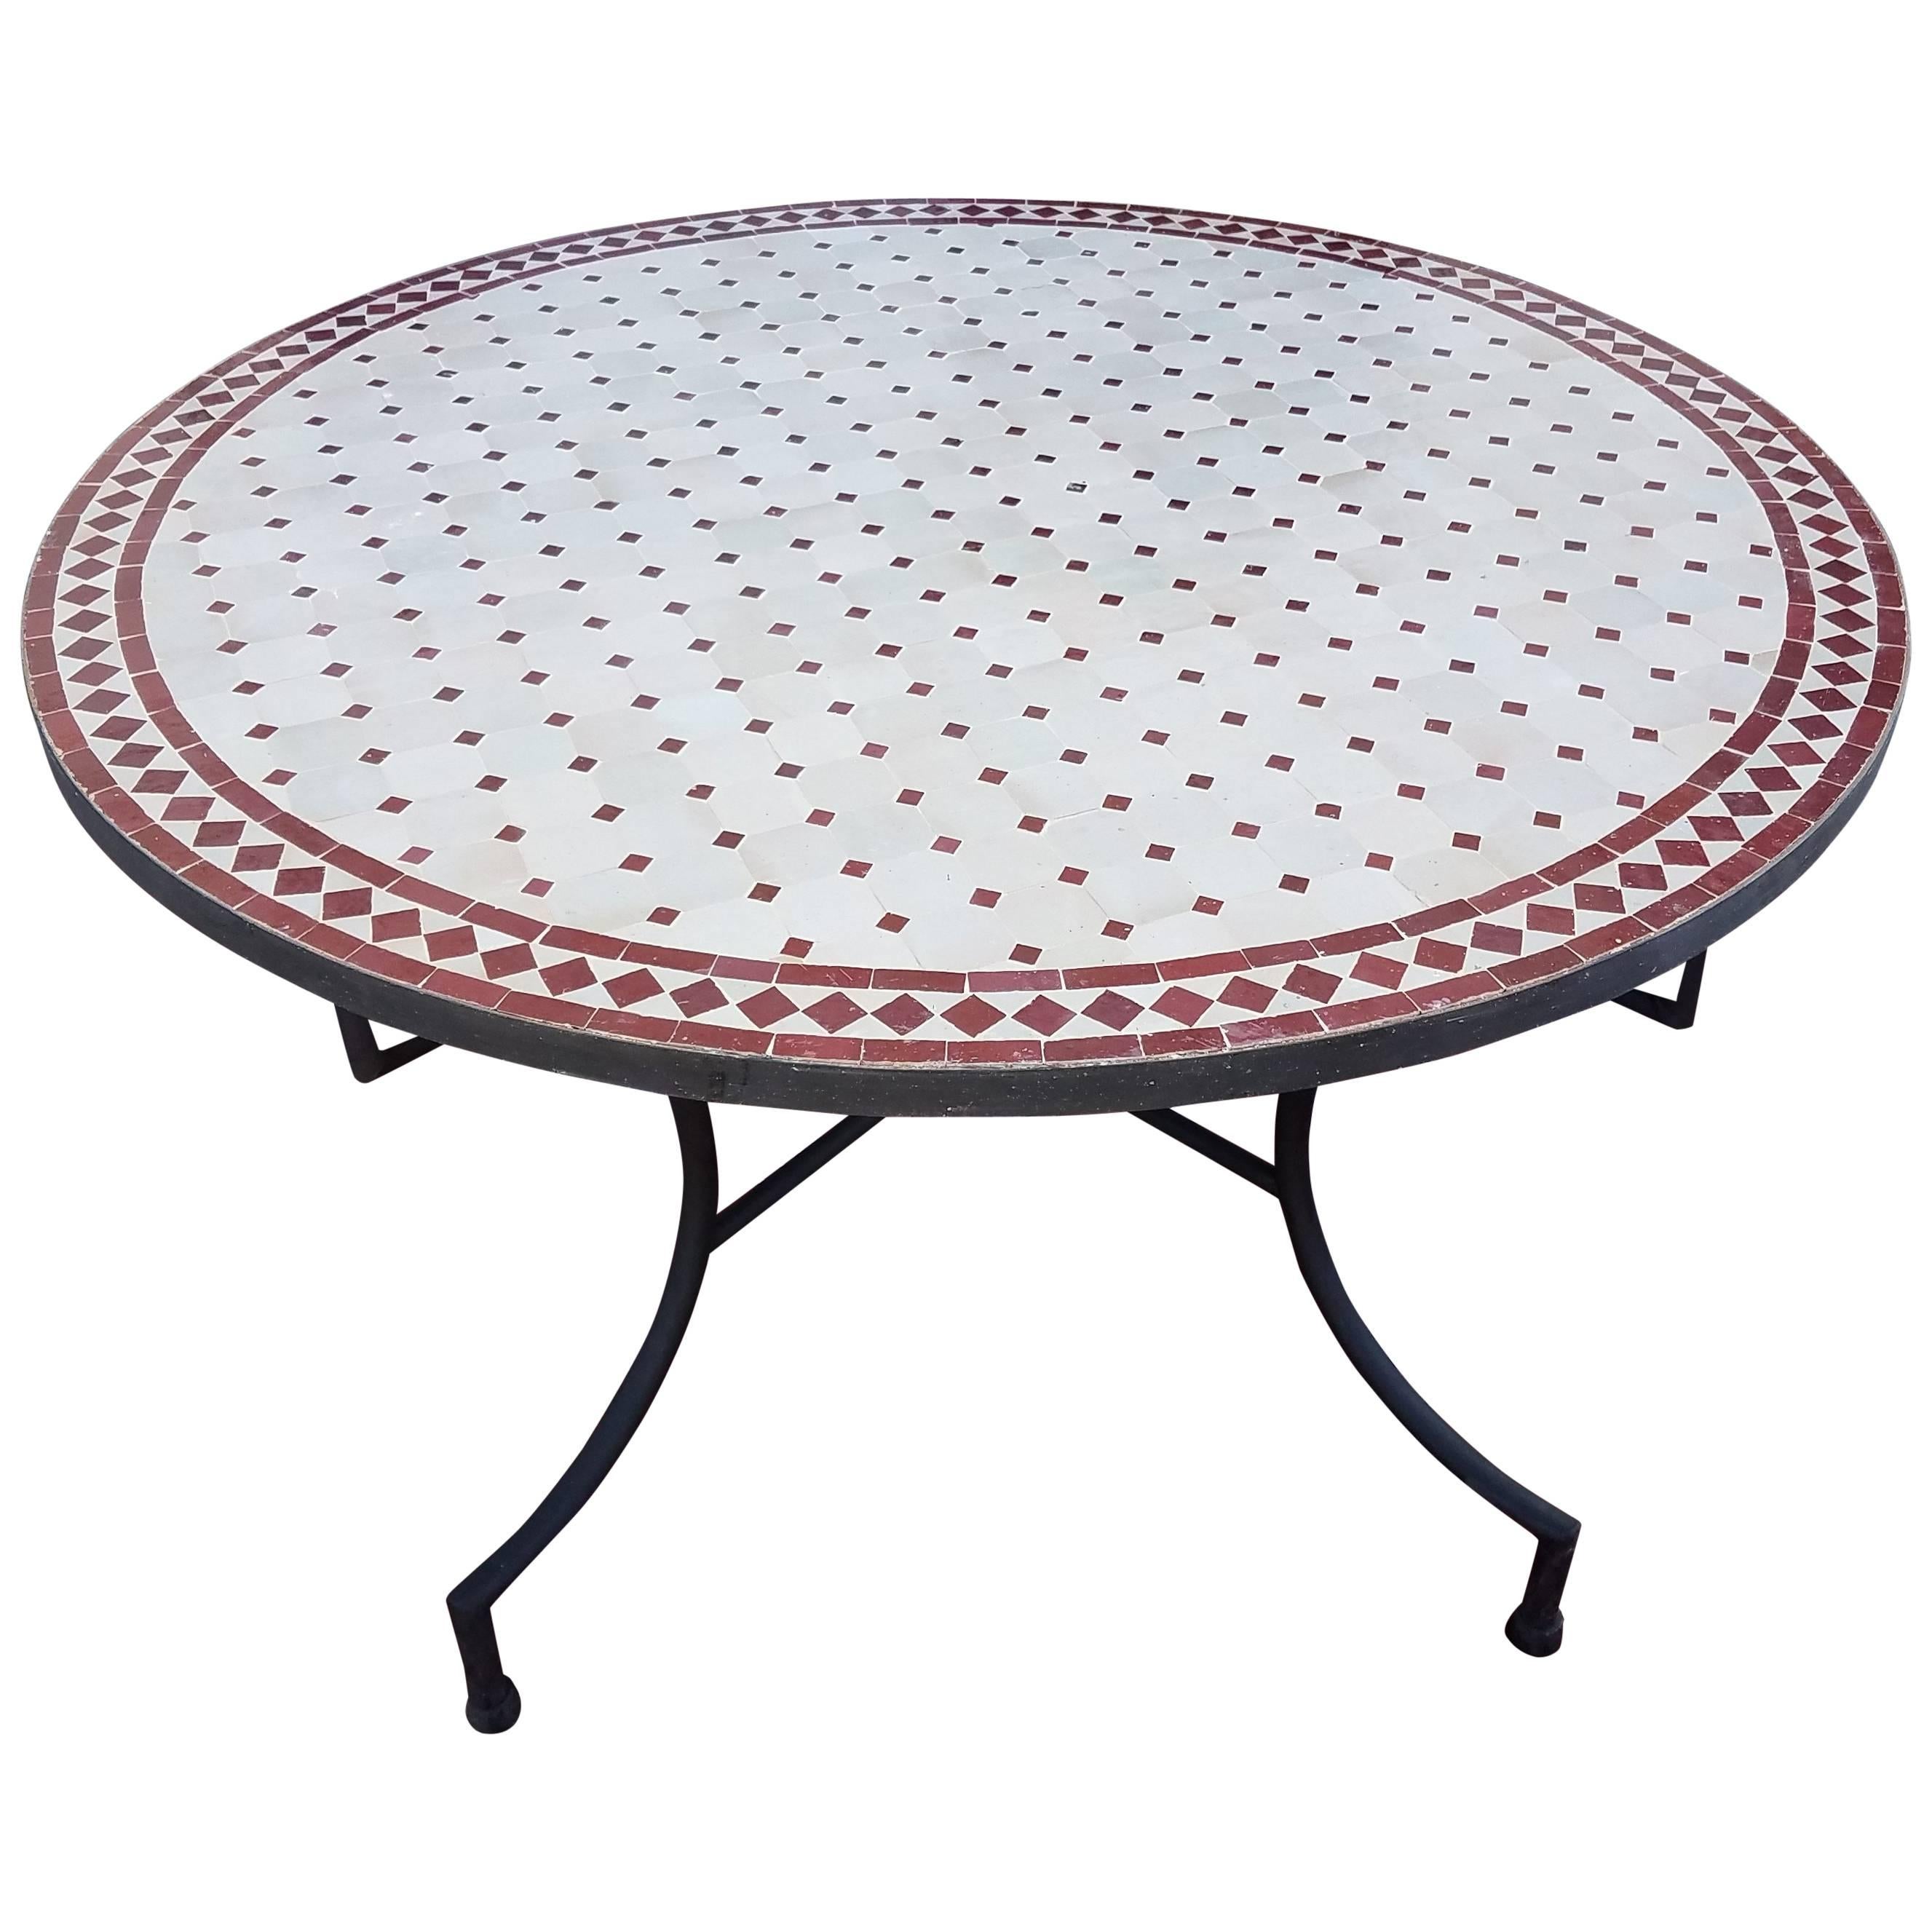 Round Moroccan Mosaic Table, Natural / Burgundy